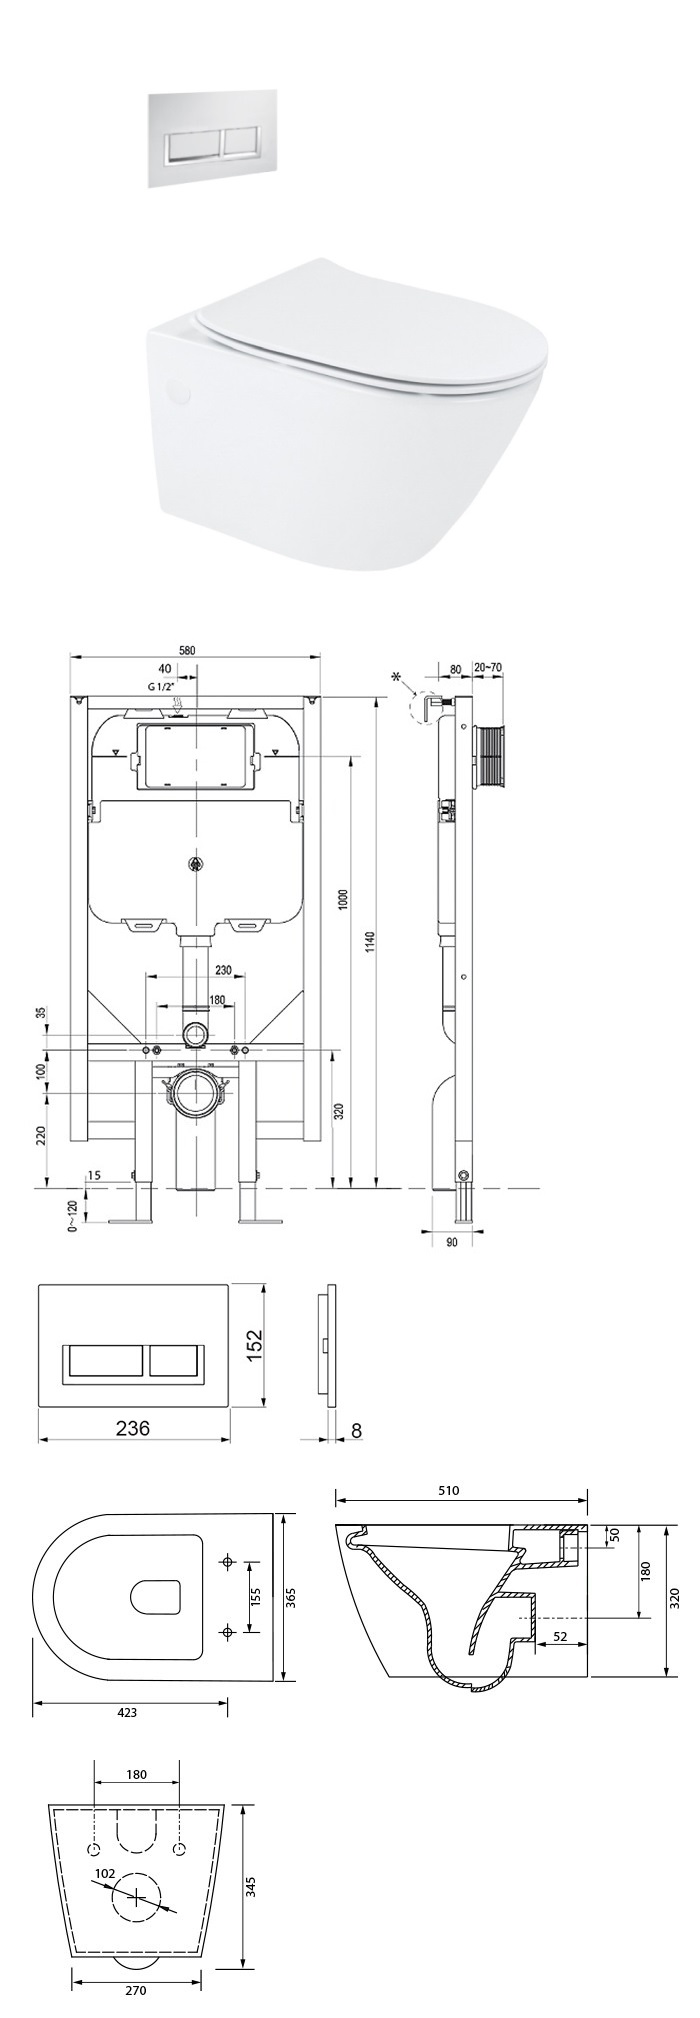 Streamline Arcisan Synergii Wall Hung Toilet Suite specifications